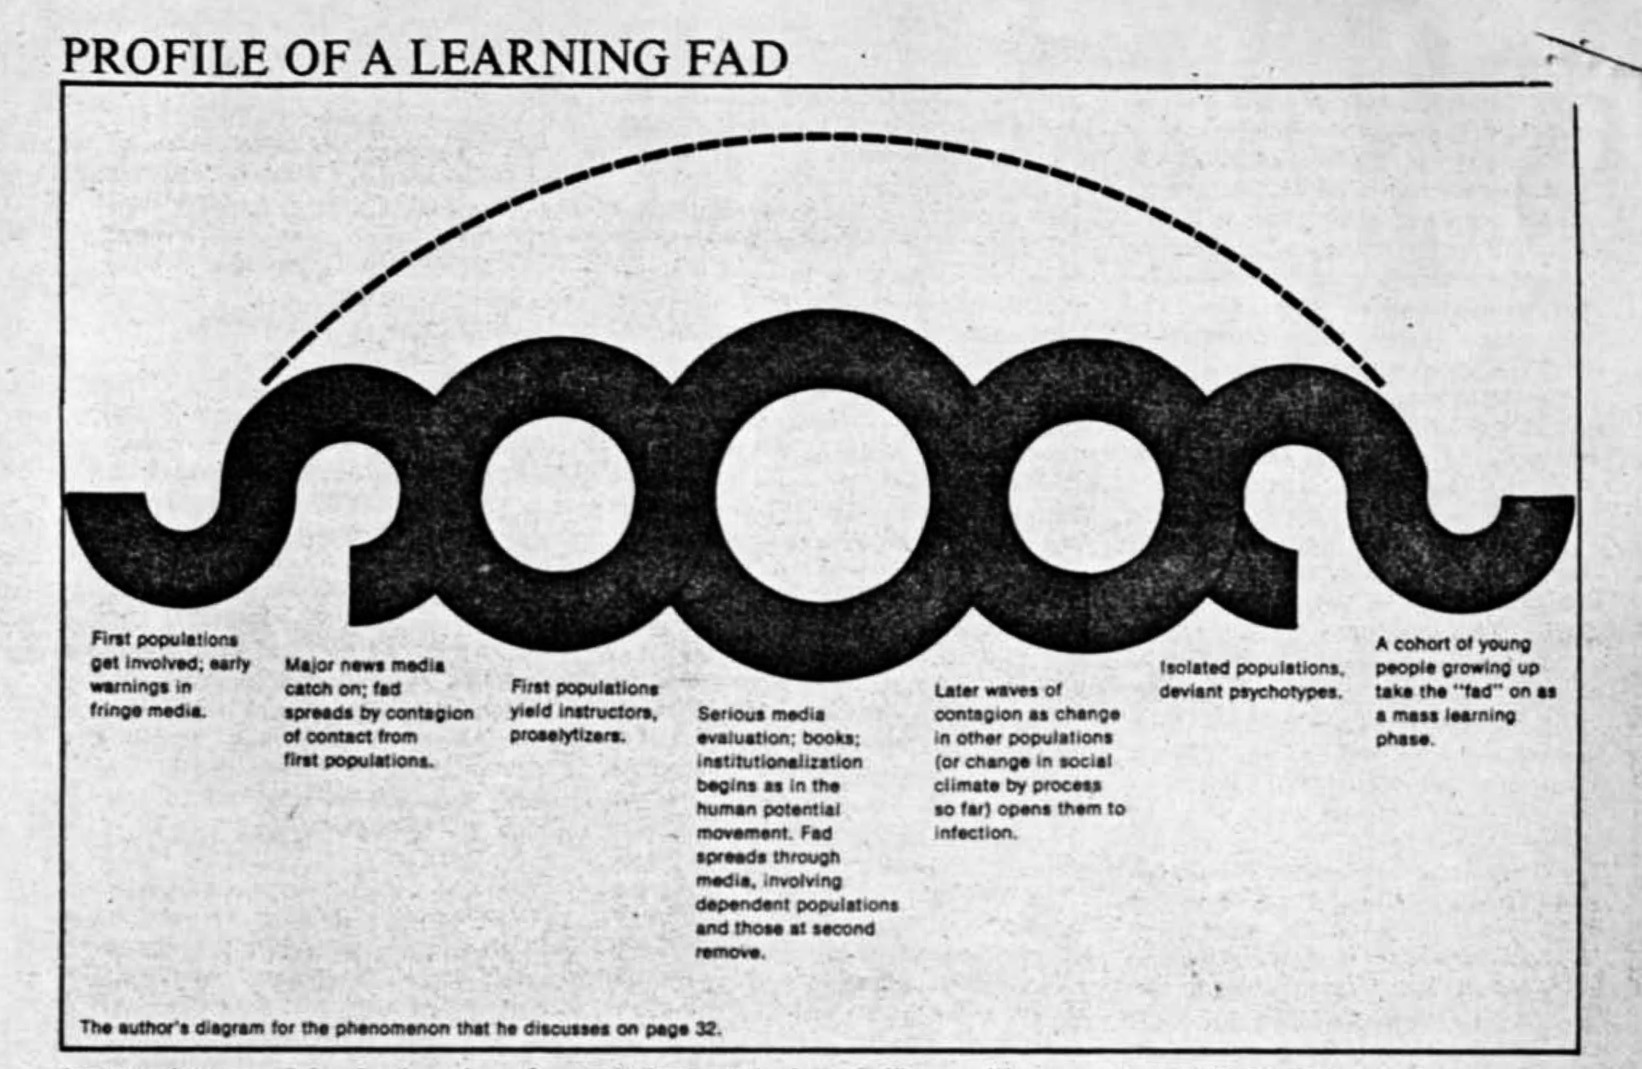 From 'How We Learn In America Today' by Michael Rossman in Saturday Review of Education in 1972. Diagram by author.